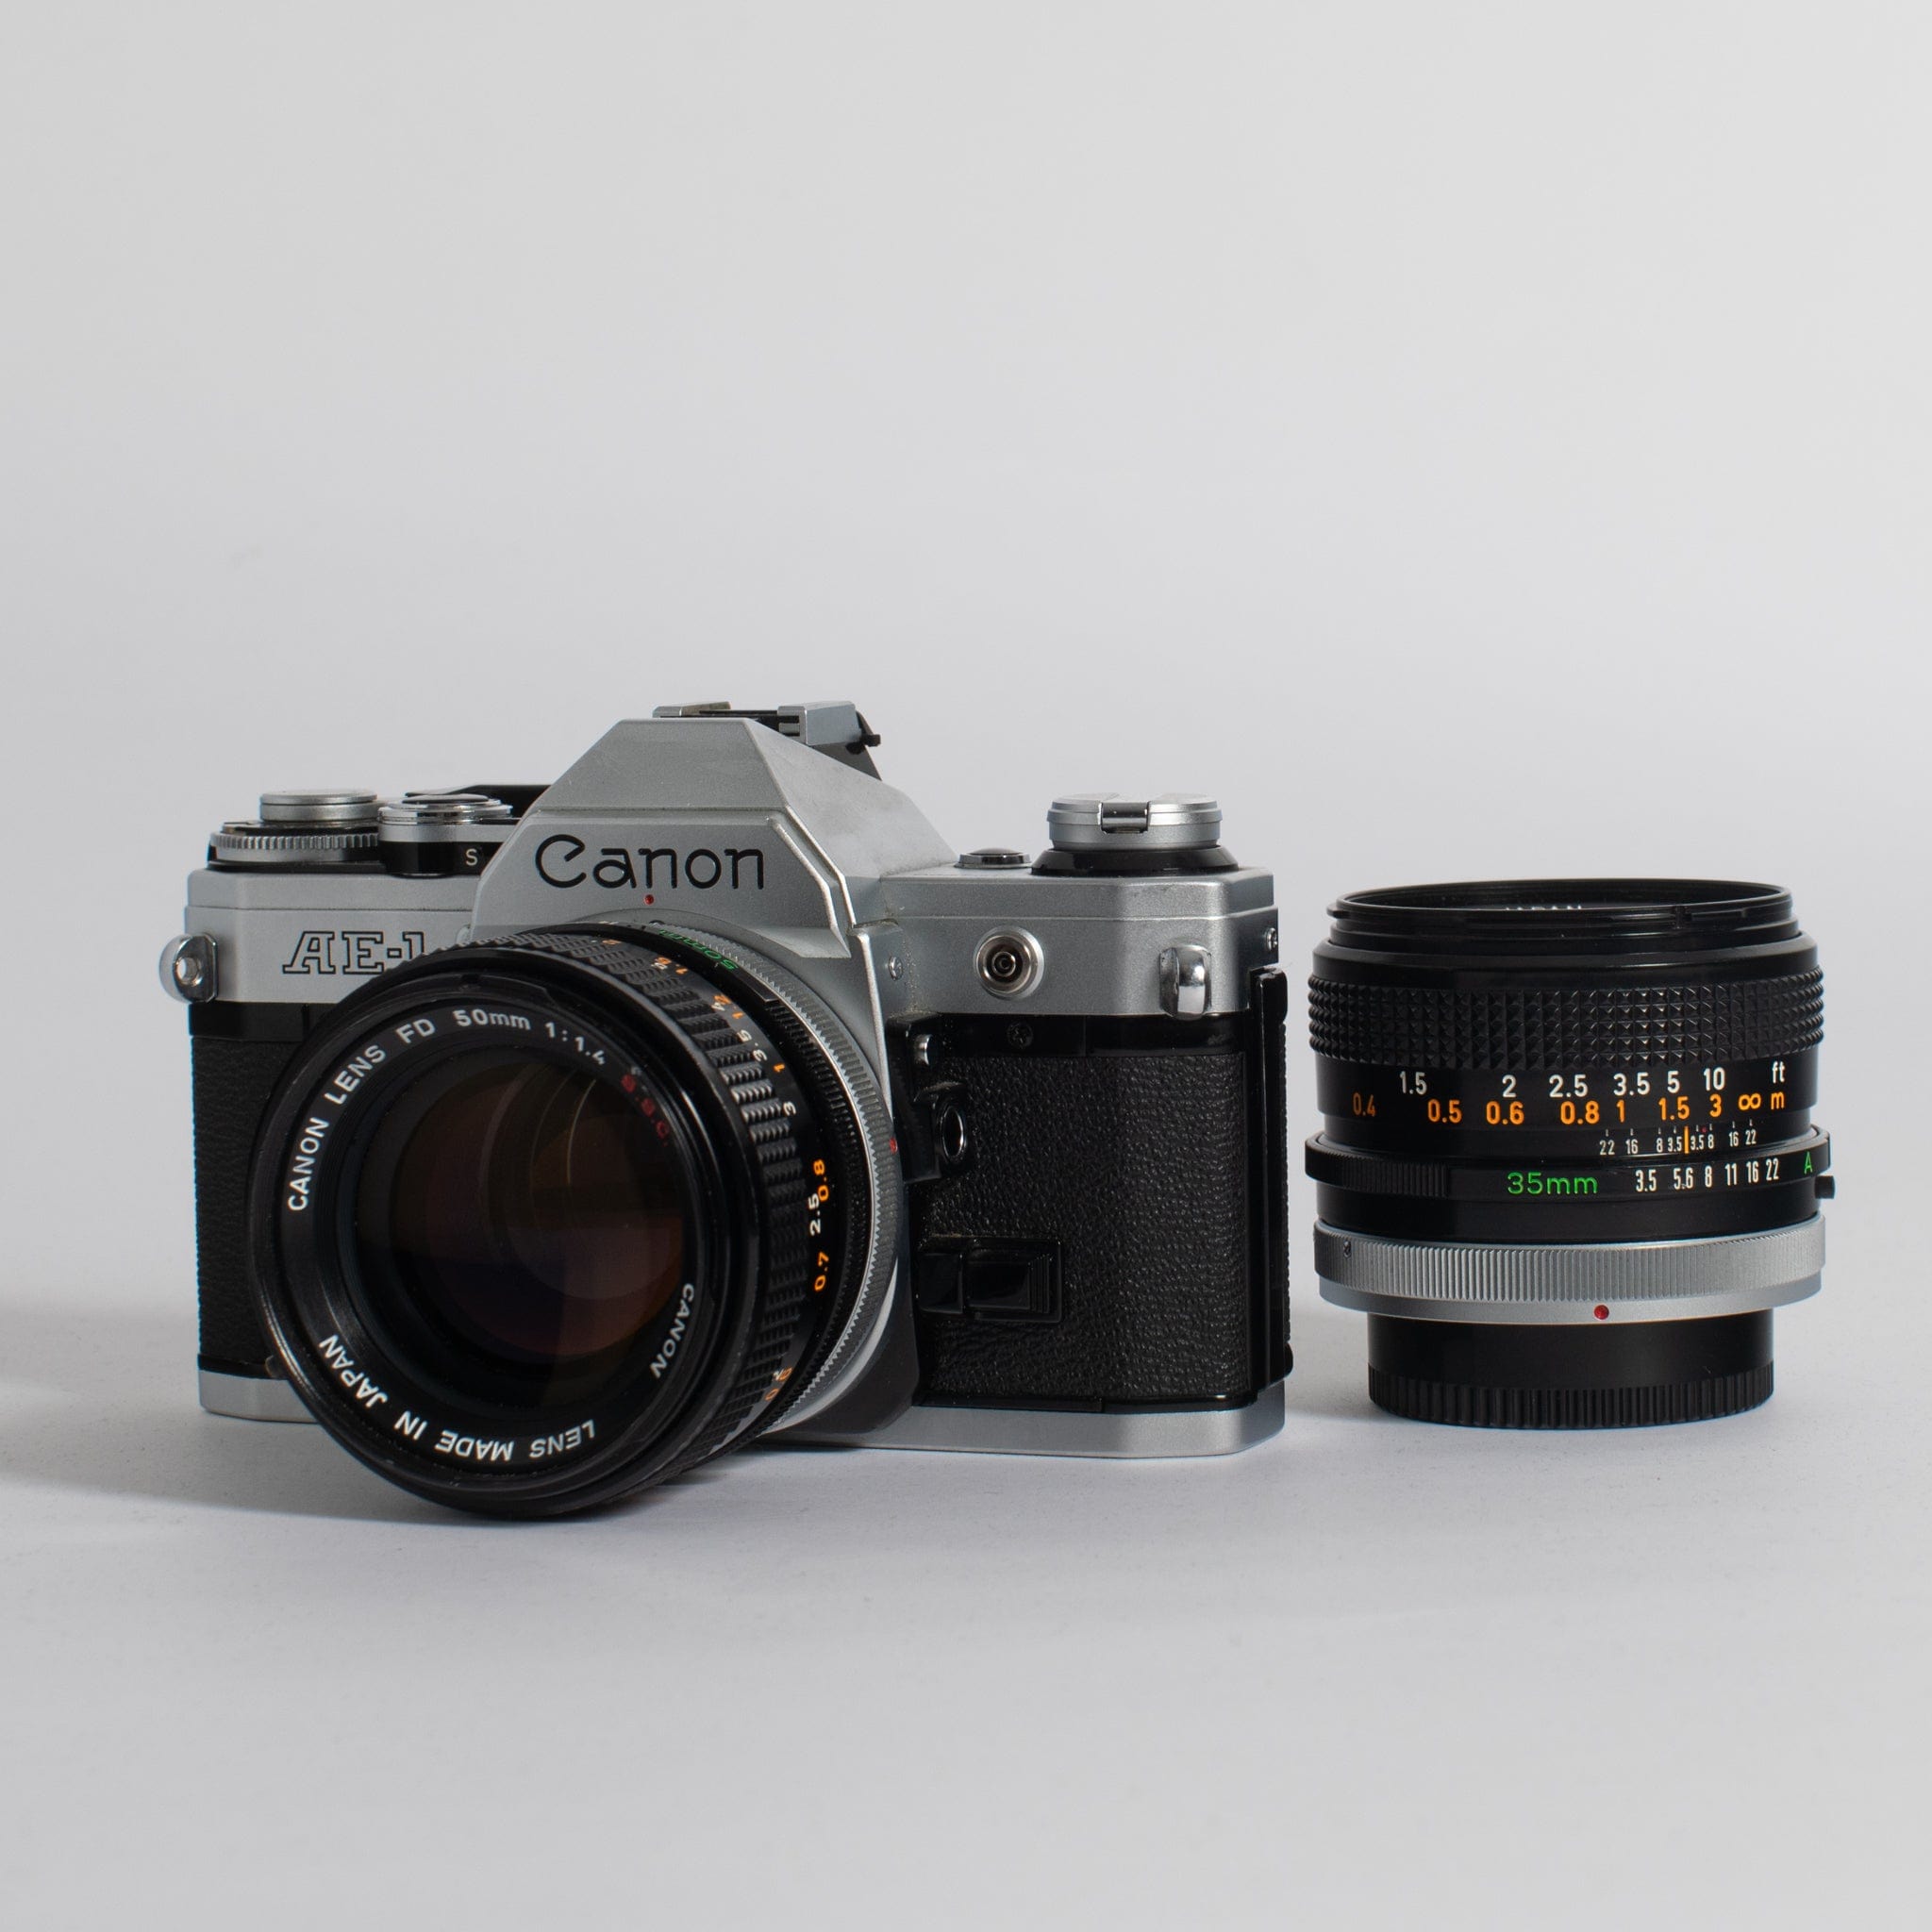 Canon AE-1 with 50mm f/1.4 and 35mm f2.8 lenses – Film Supply Club